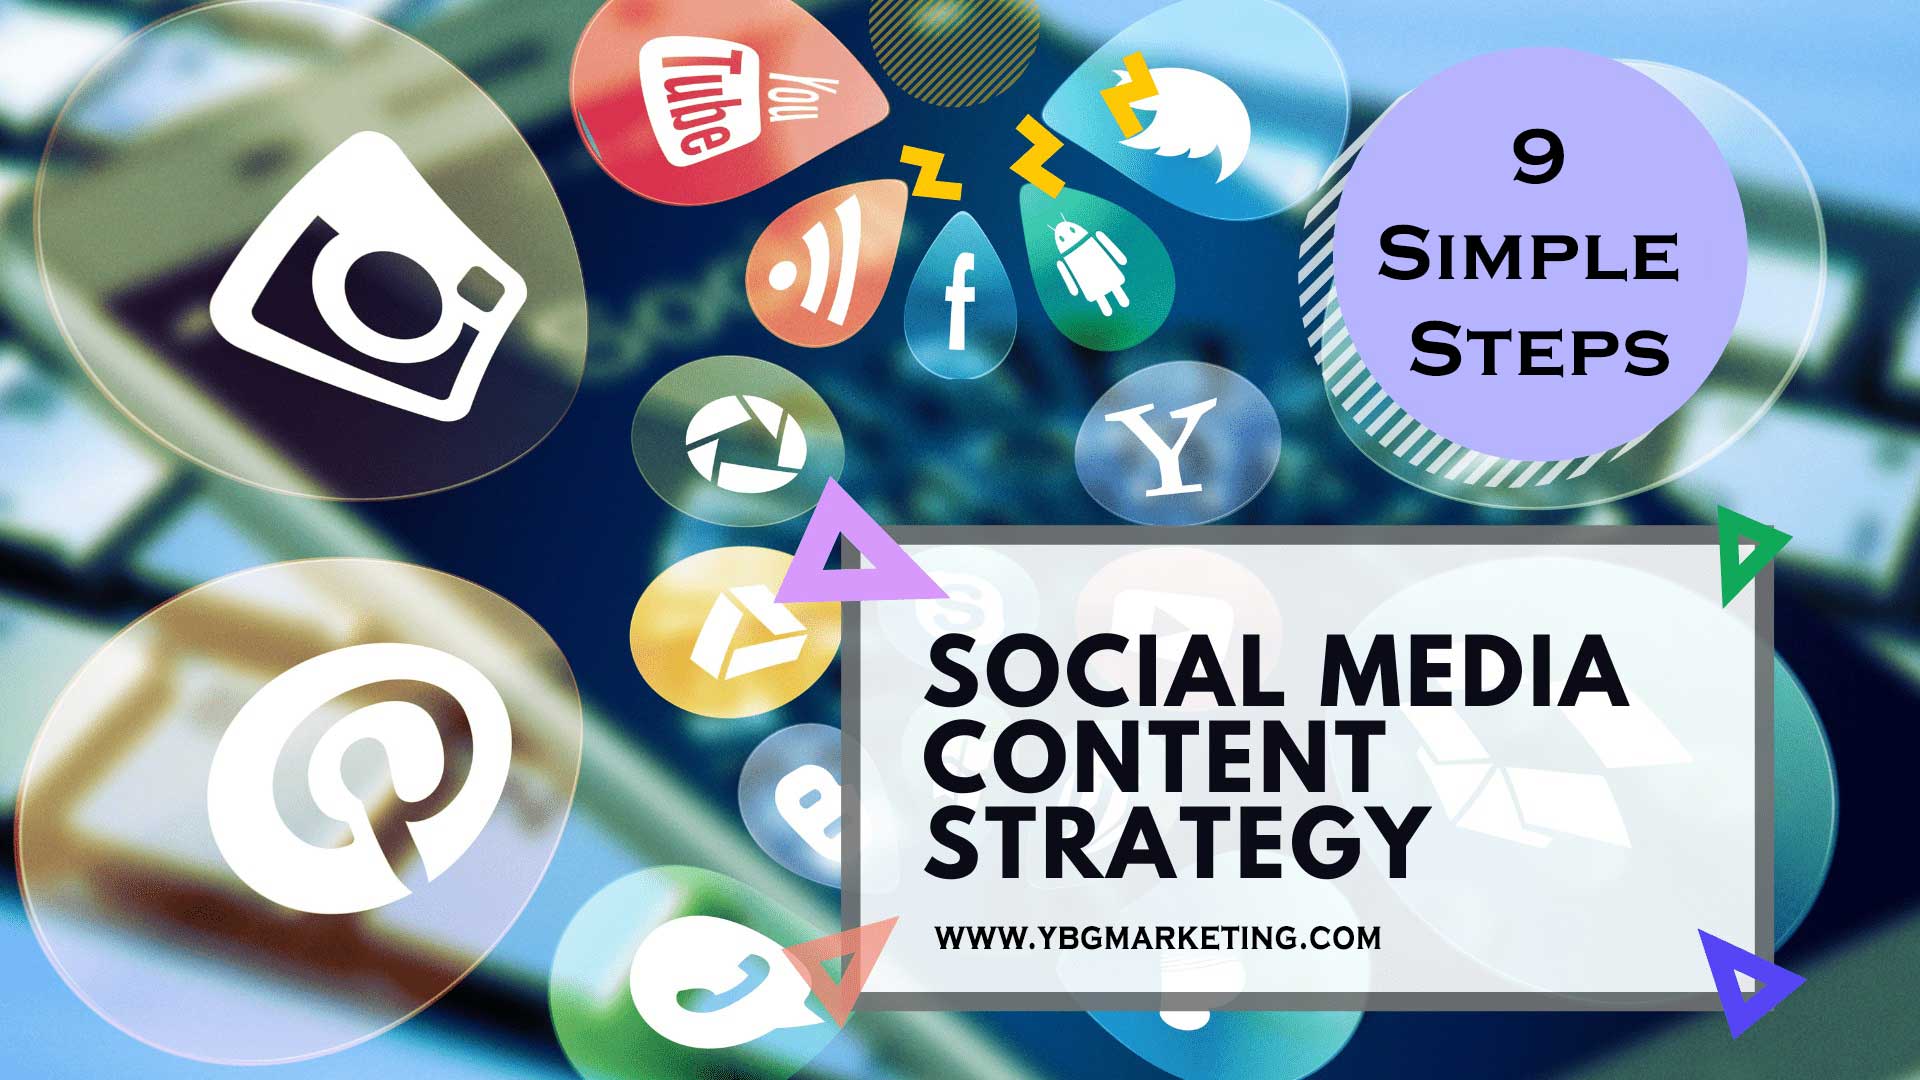 Learn How to Create a Social Media Content Strategy in 9 Simple Steps